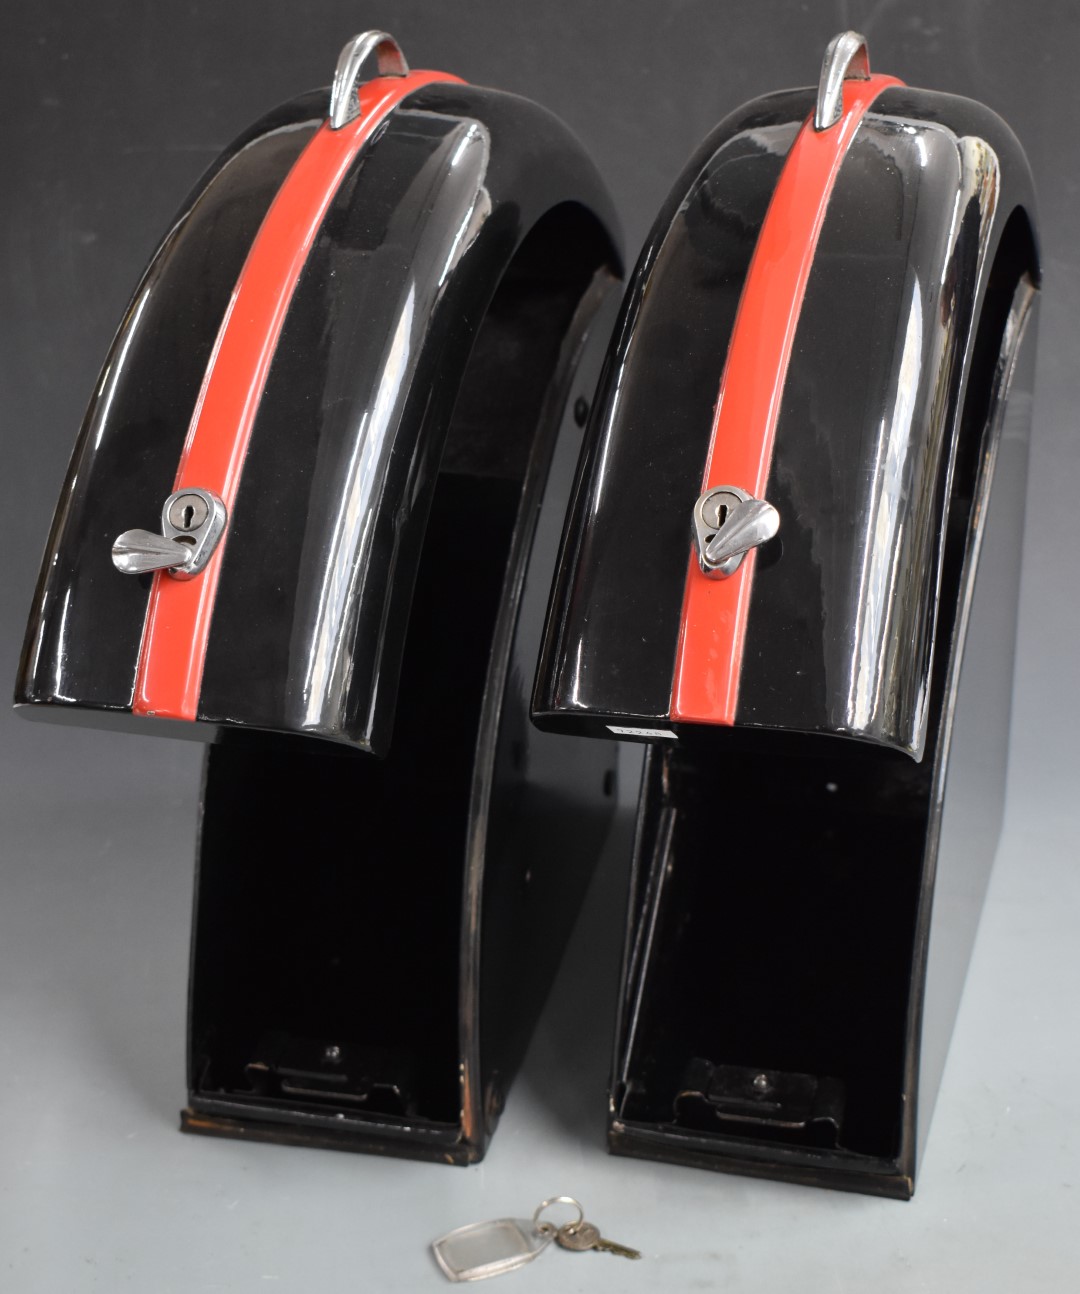 Pair of Rodark motorcycle panniers to suit vintage or classic motorbike, with chrome carrying - Image 2 of 4